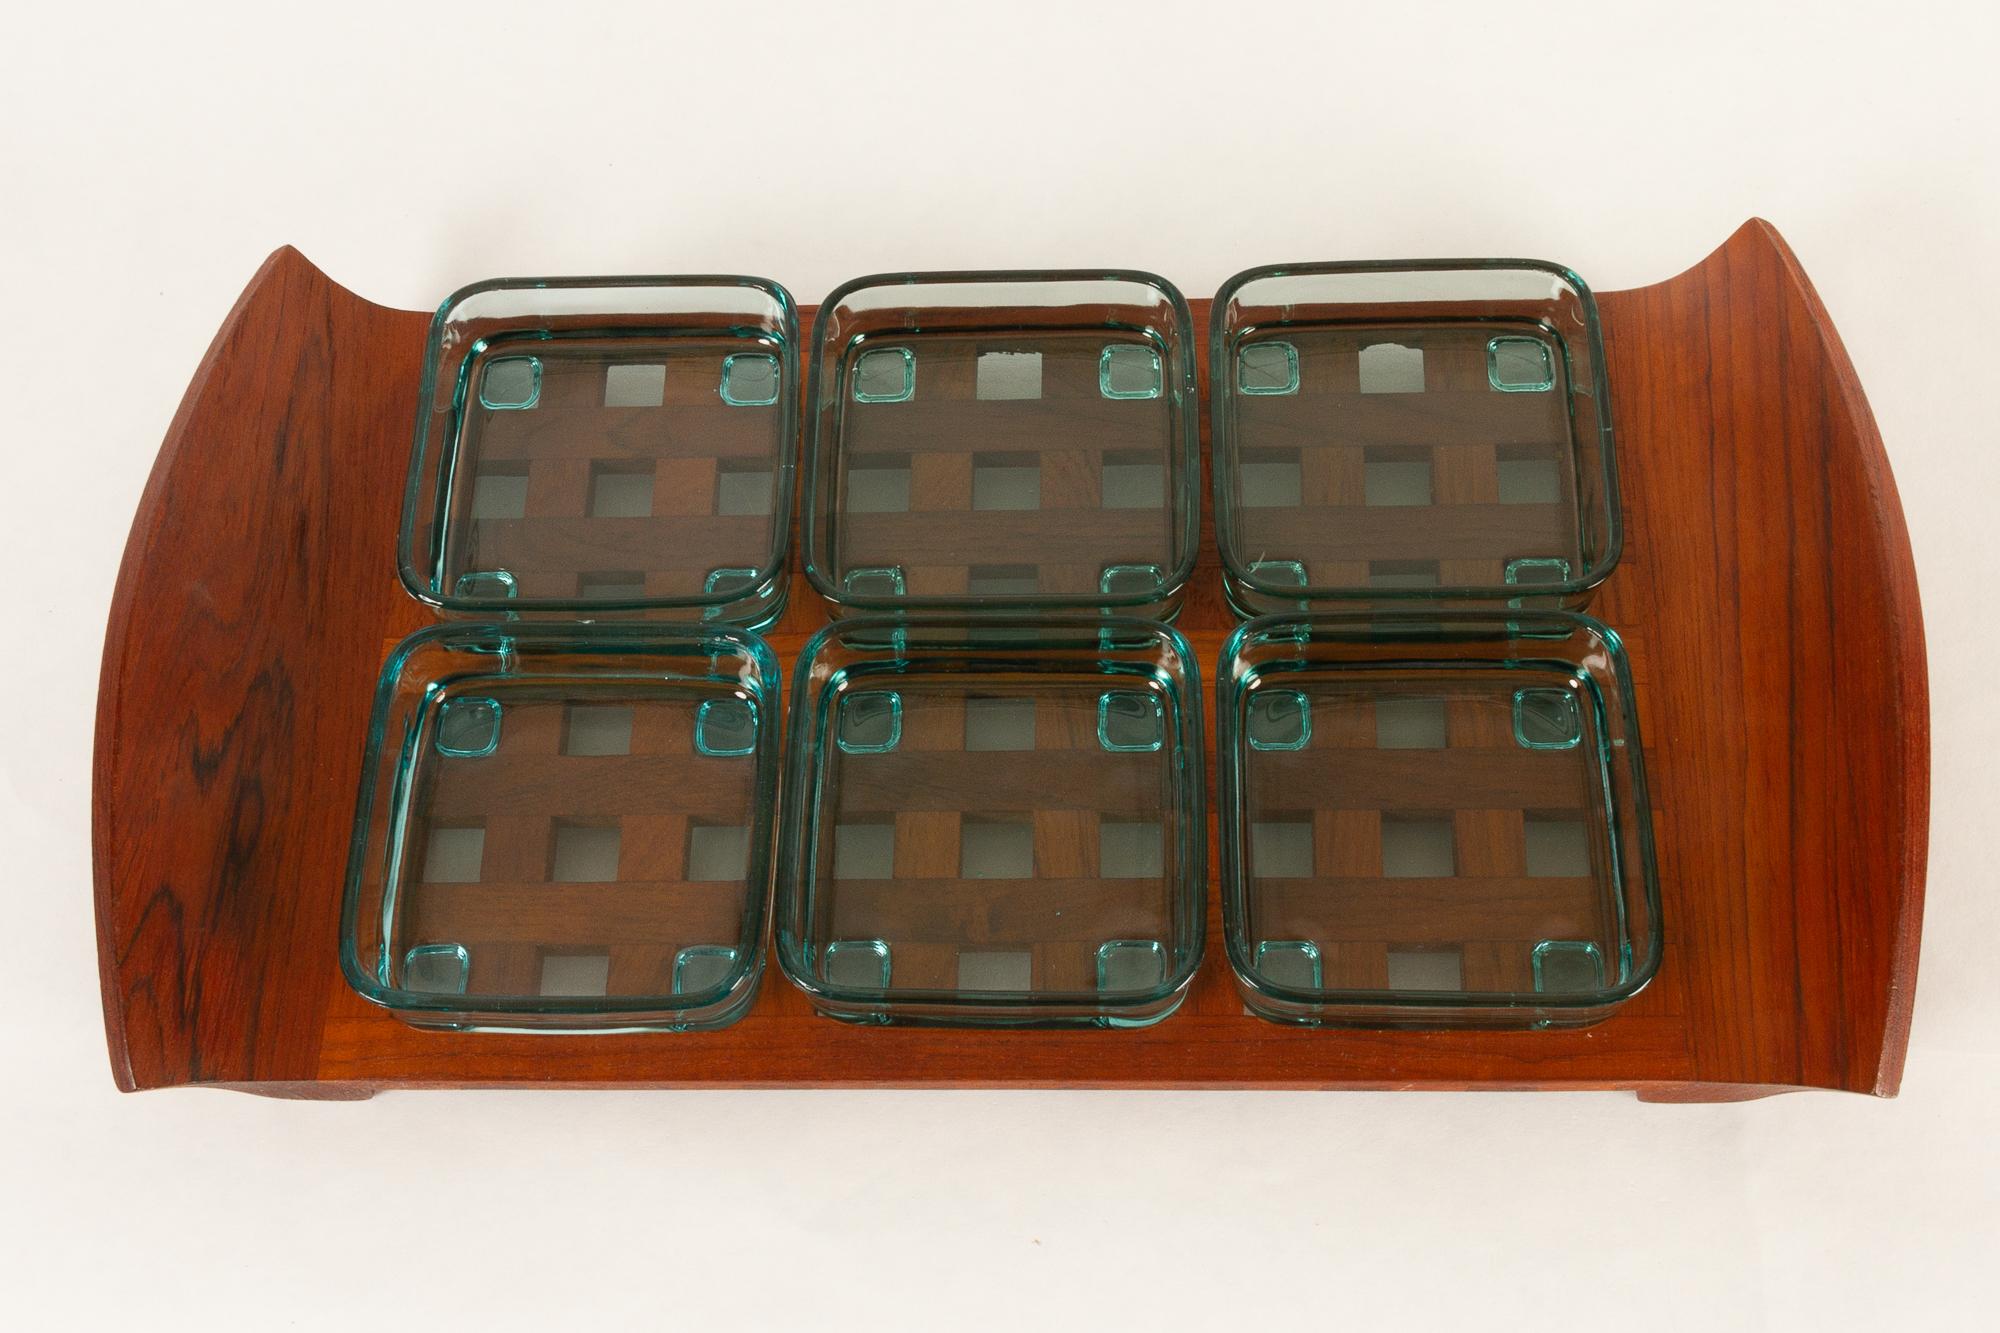 Mid-20th Century Vintage Danish Teak Tray with Glass Bowls by Jens Harald Quistgaard, 1960s For Sale